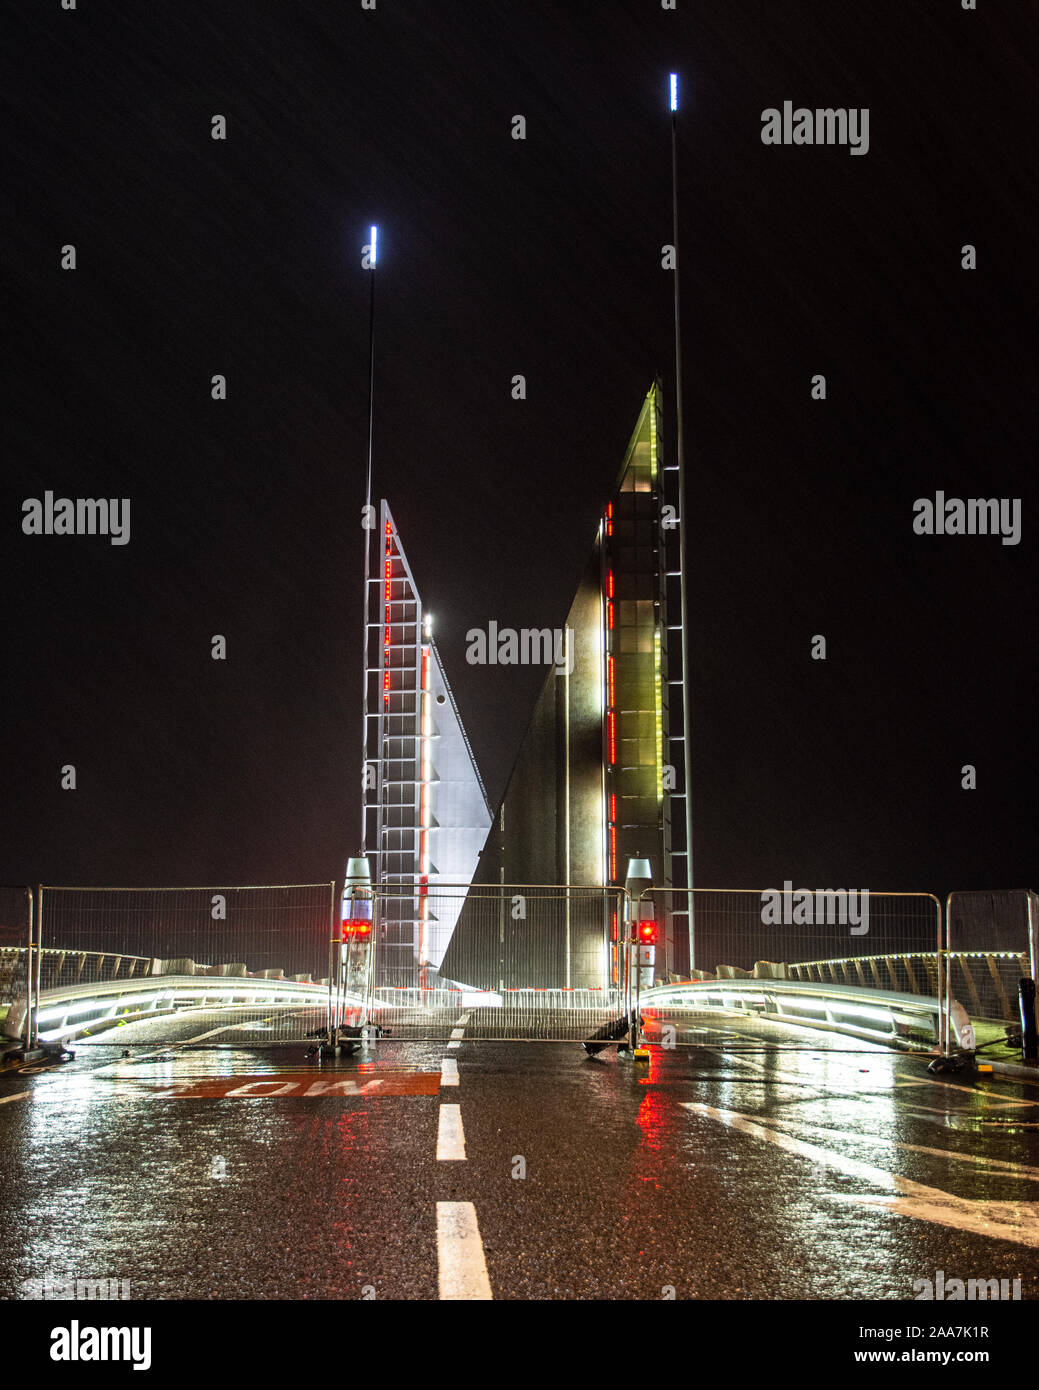 Poole, England, UK - October 3, 2019: Rain falls on the broken Twin Sails Bridge which is fenced off and left lifted while awaiting repair on Poole Ha Stock Photo